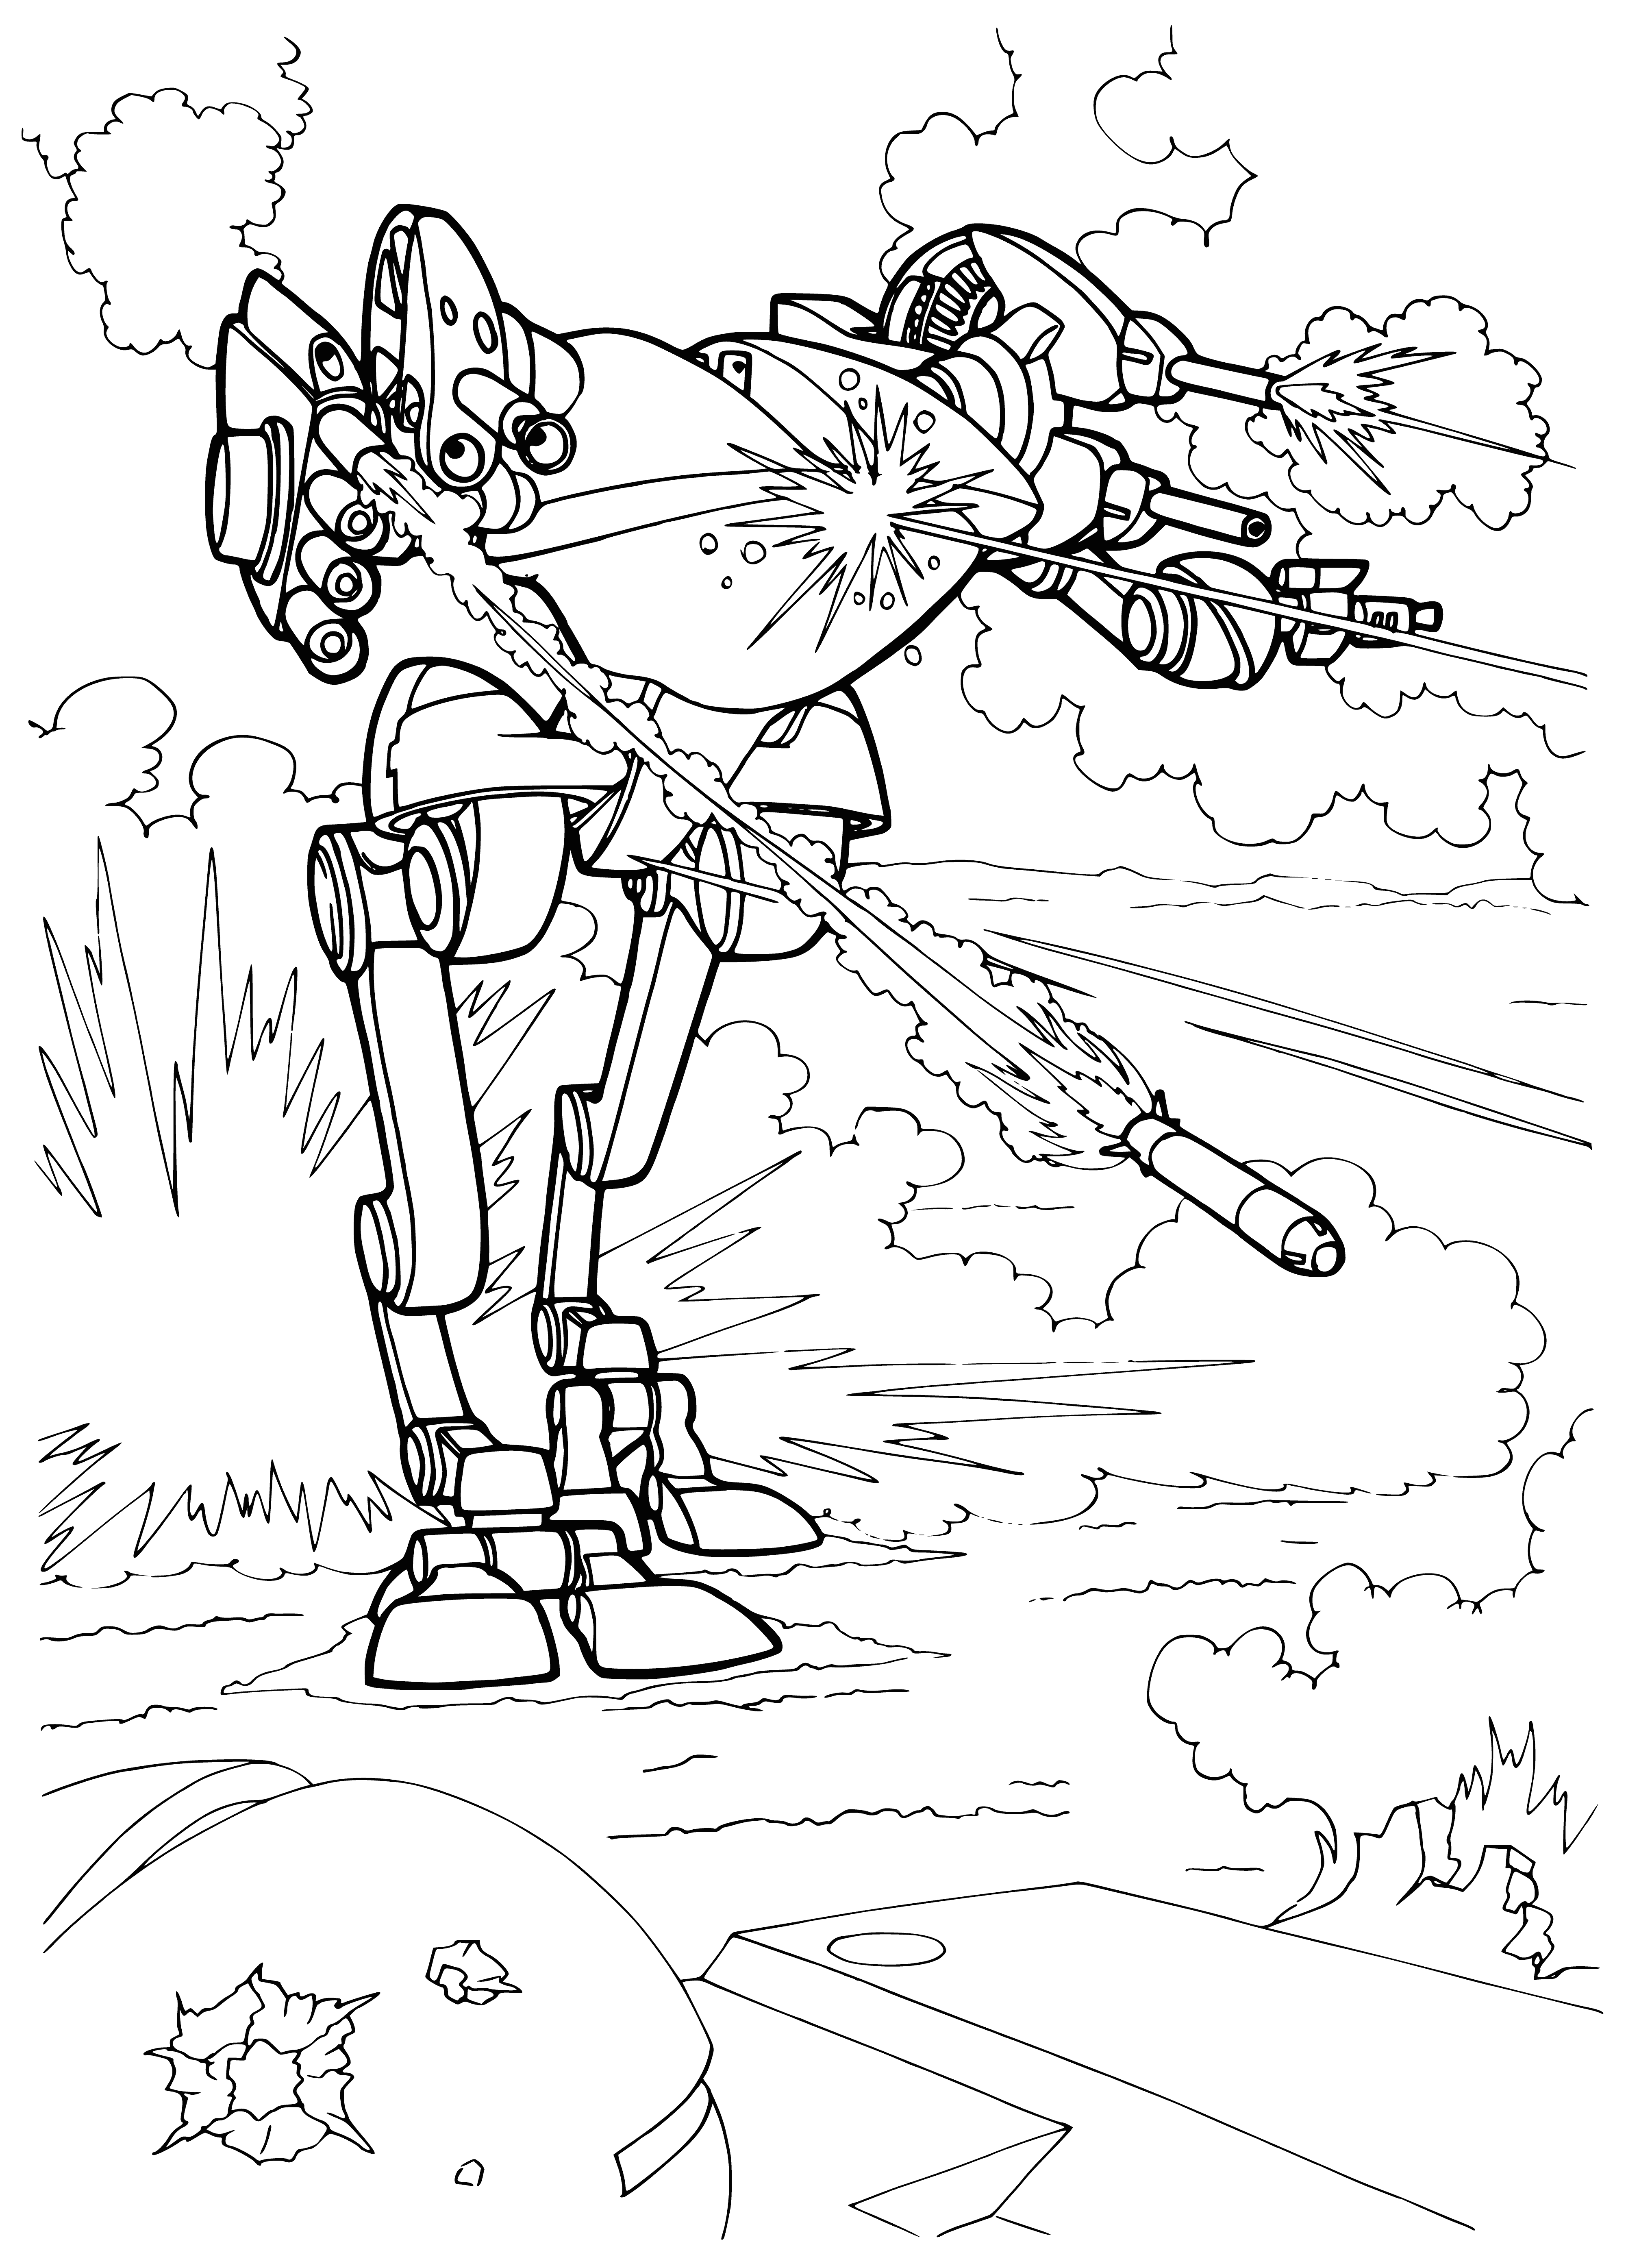 coloring page: Future wars fought by powerful, flying robots armed with lasers & plasma guns; able to withstand & attack enemy targets from a distance.